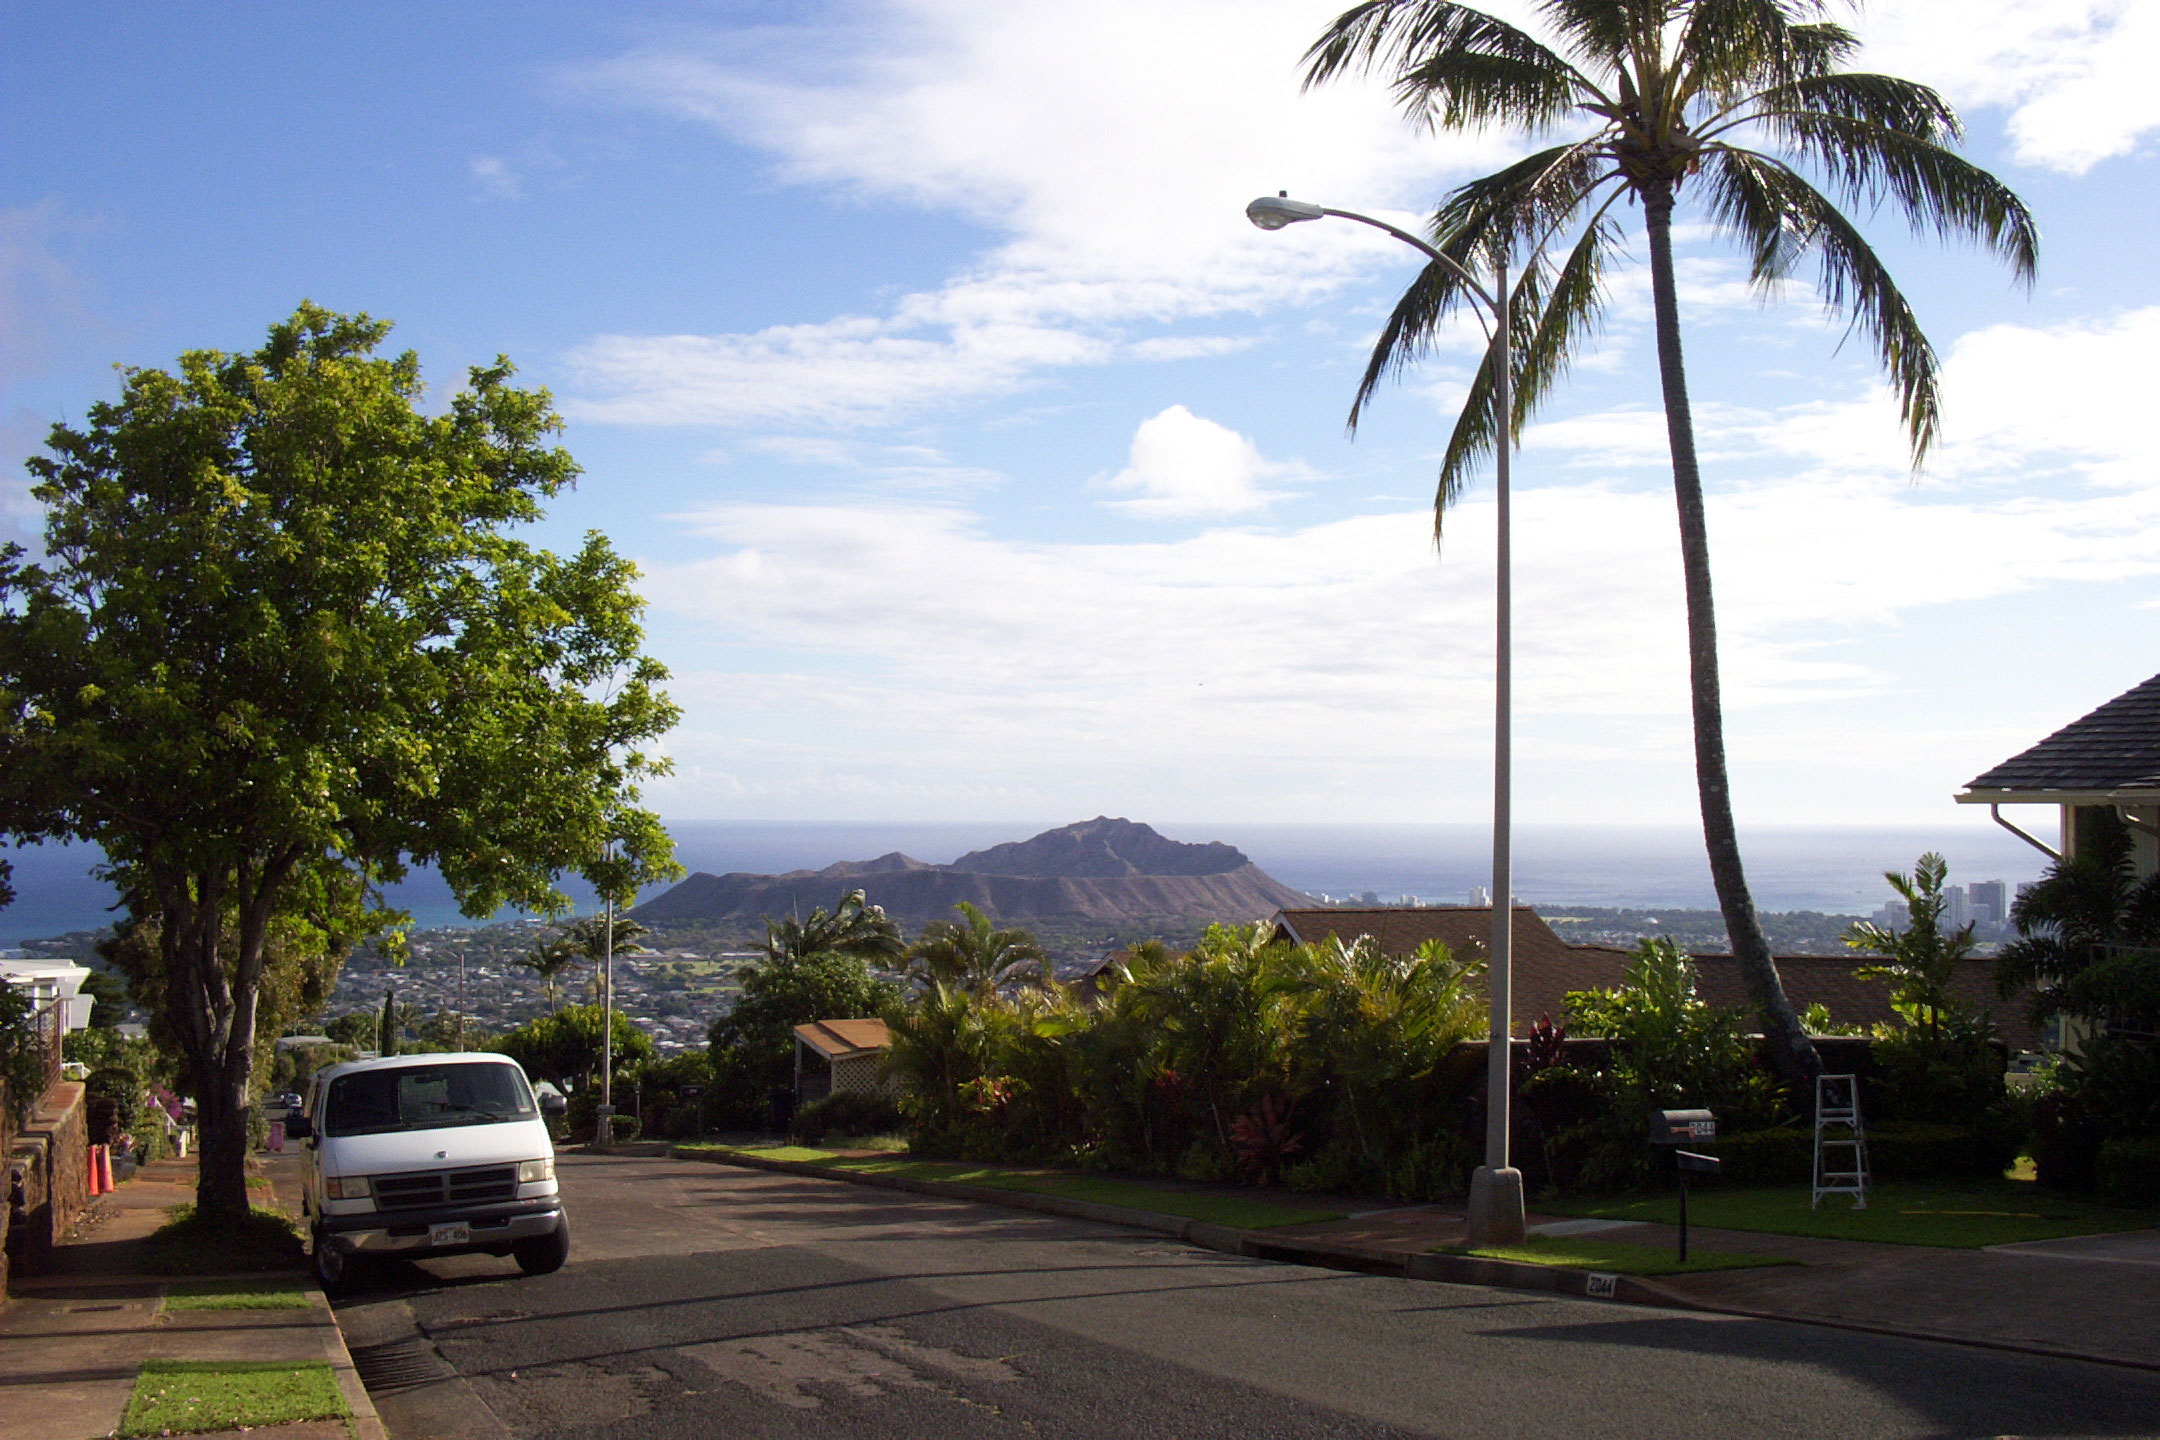 Diamond Head is part of the system of cones, vents, and their associated eruption flows that are collectively known to geologists as the Honolulu Volcanic Series